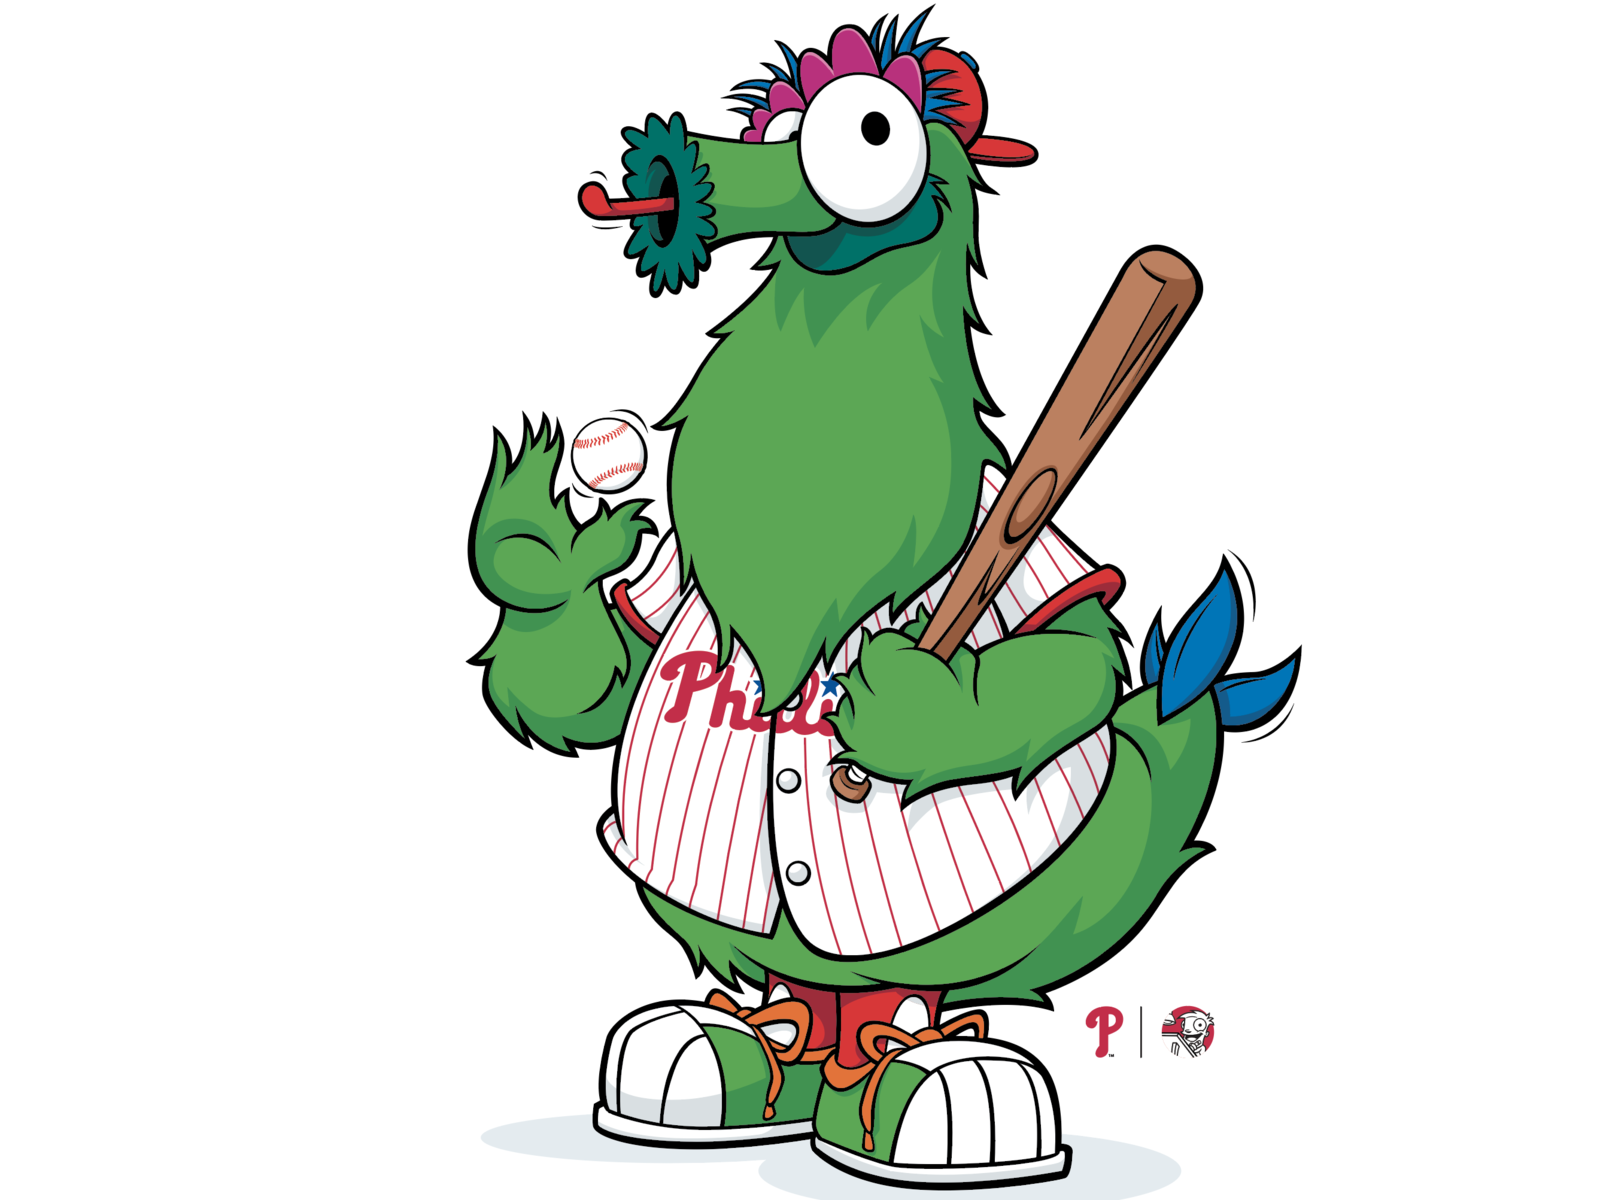 The Philly Phanatic by Matthew J Luxich on Dribbble